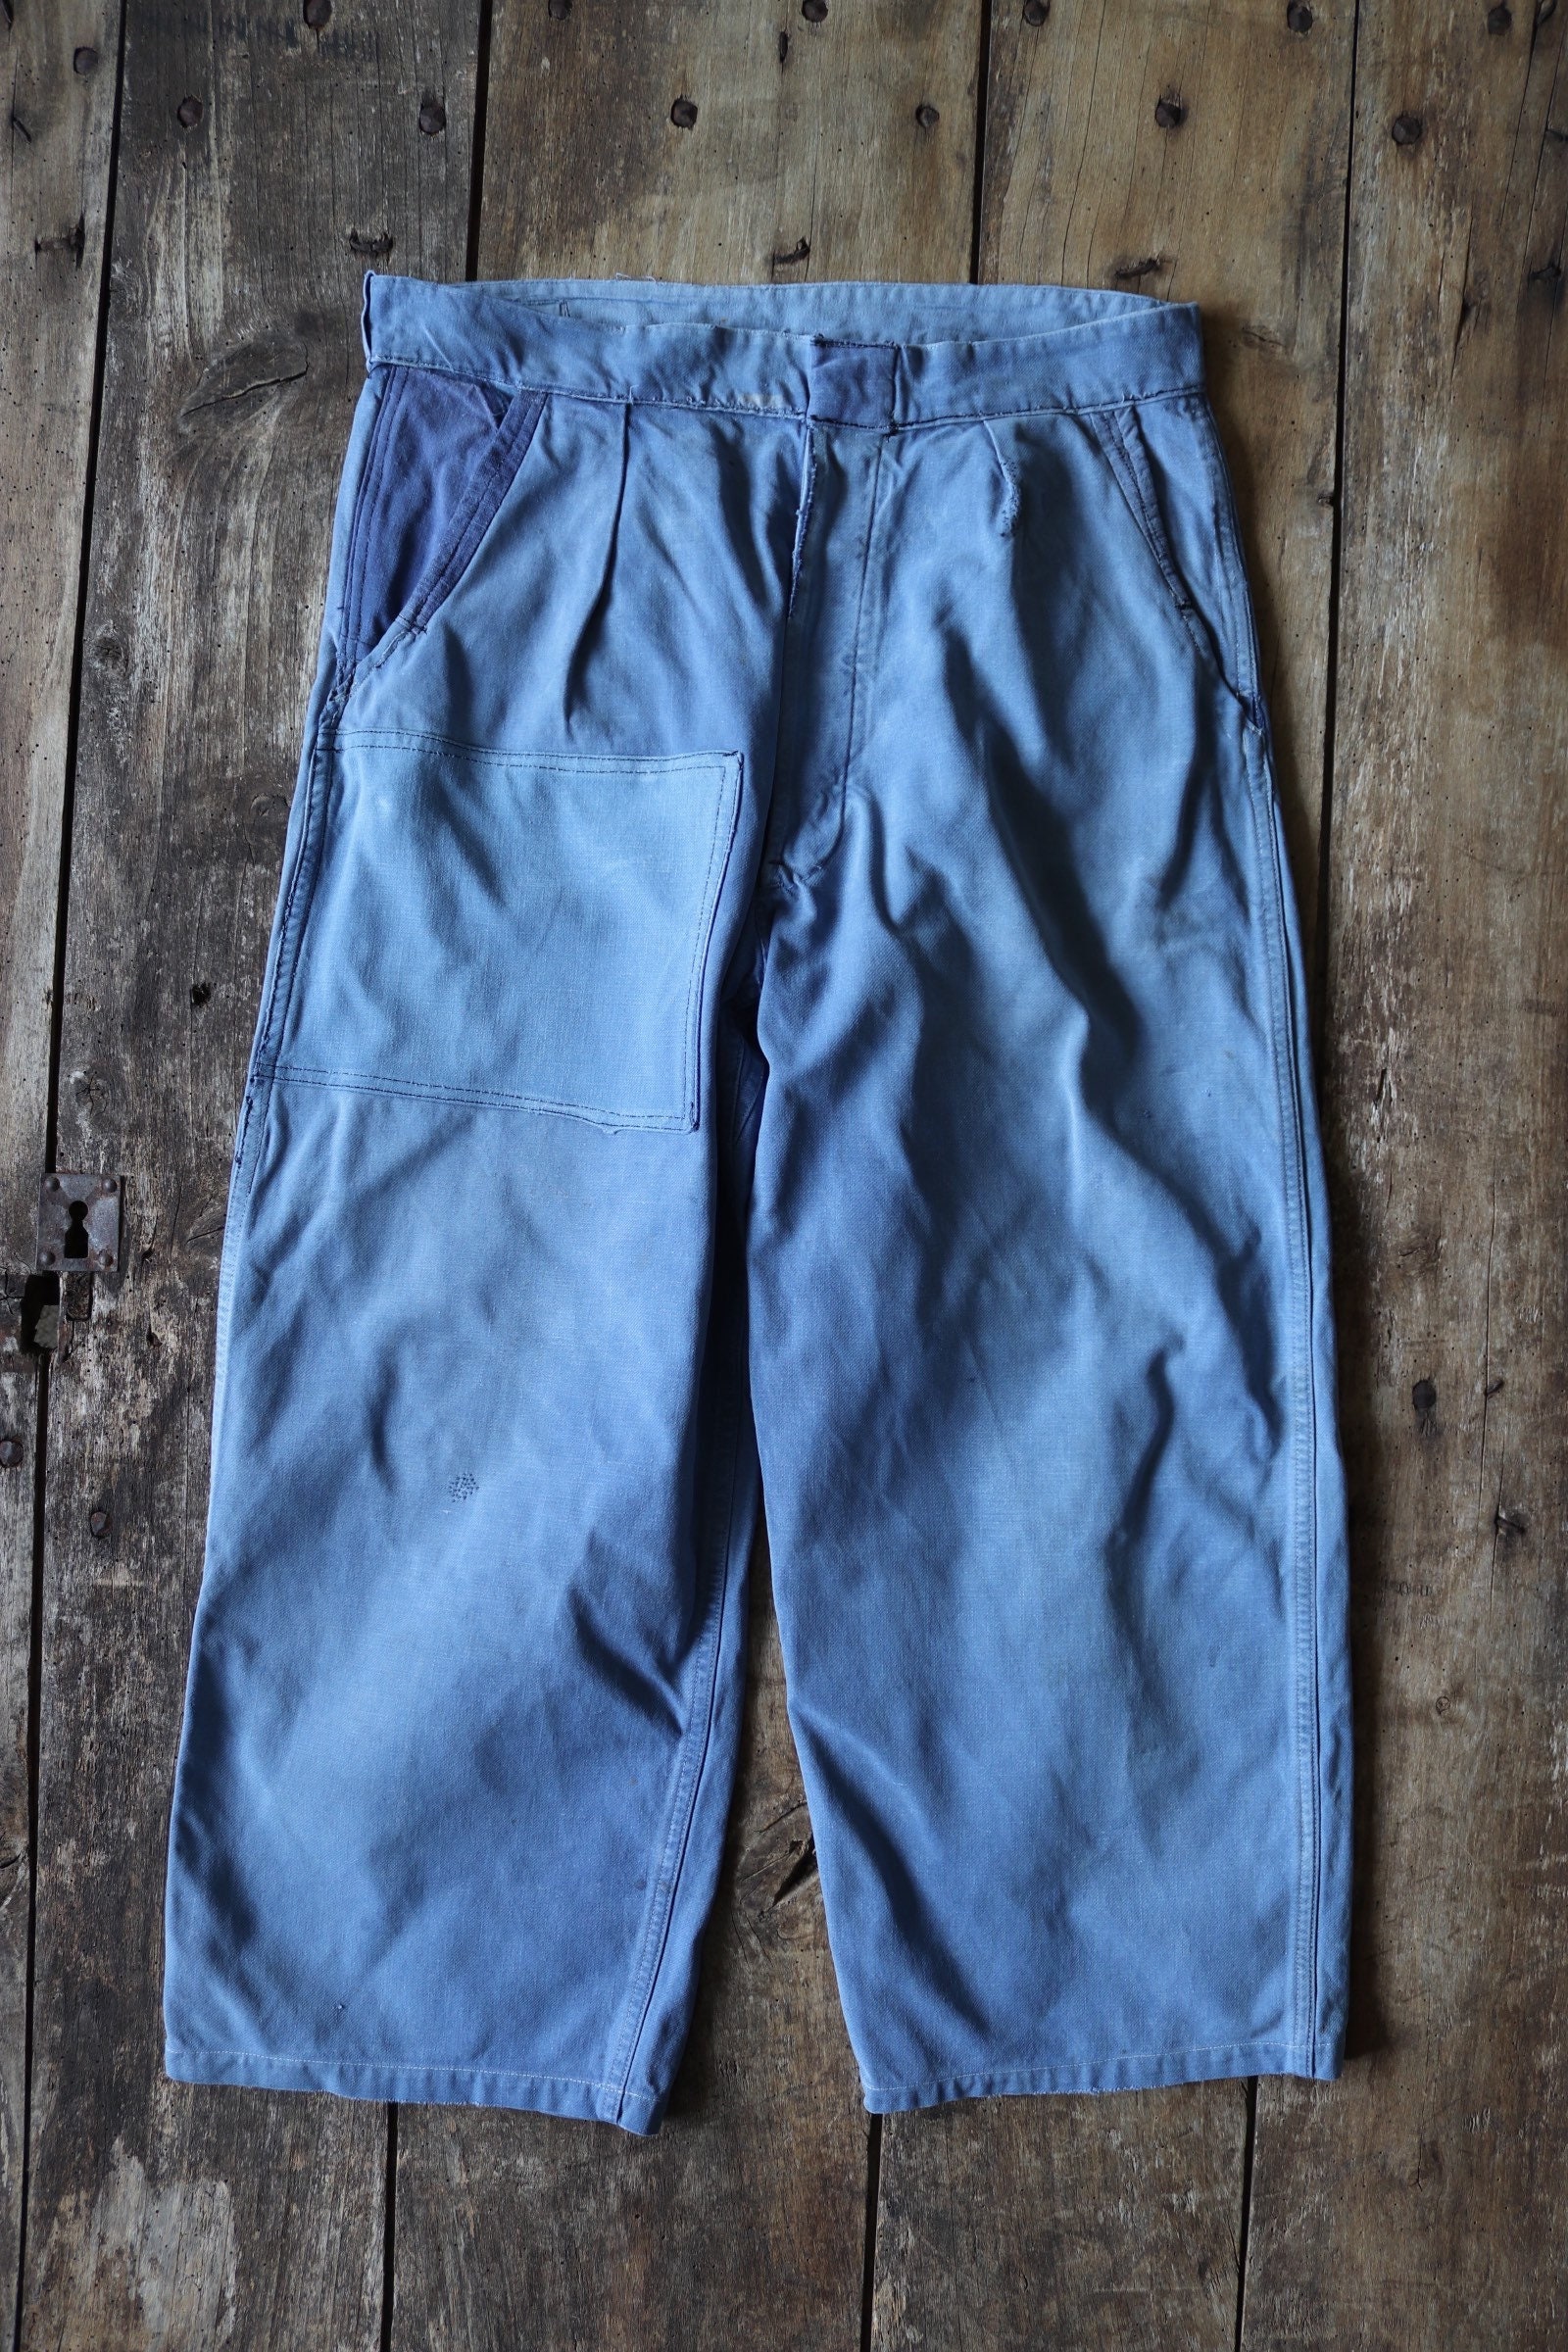 Vintage 1960s 60s French blue work trousers pants workwear chore ...